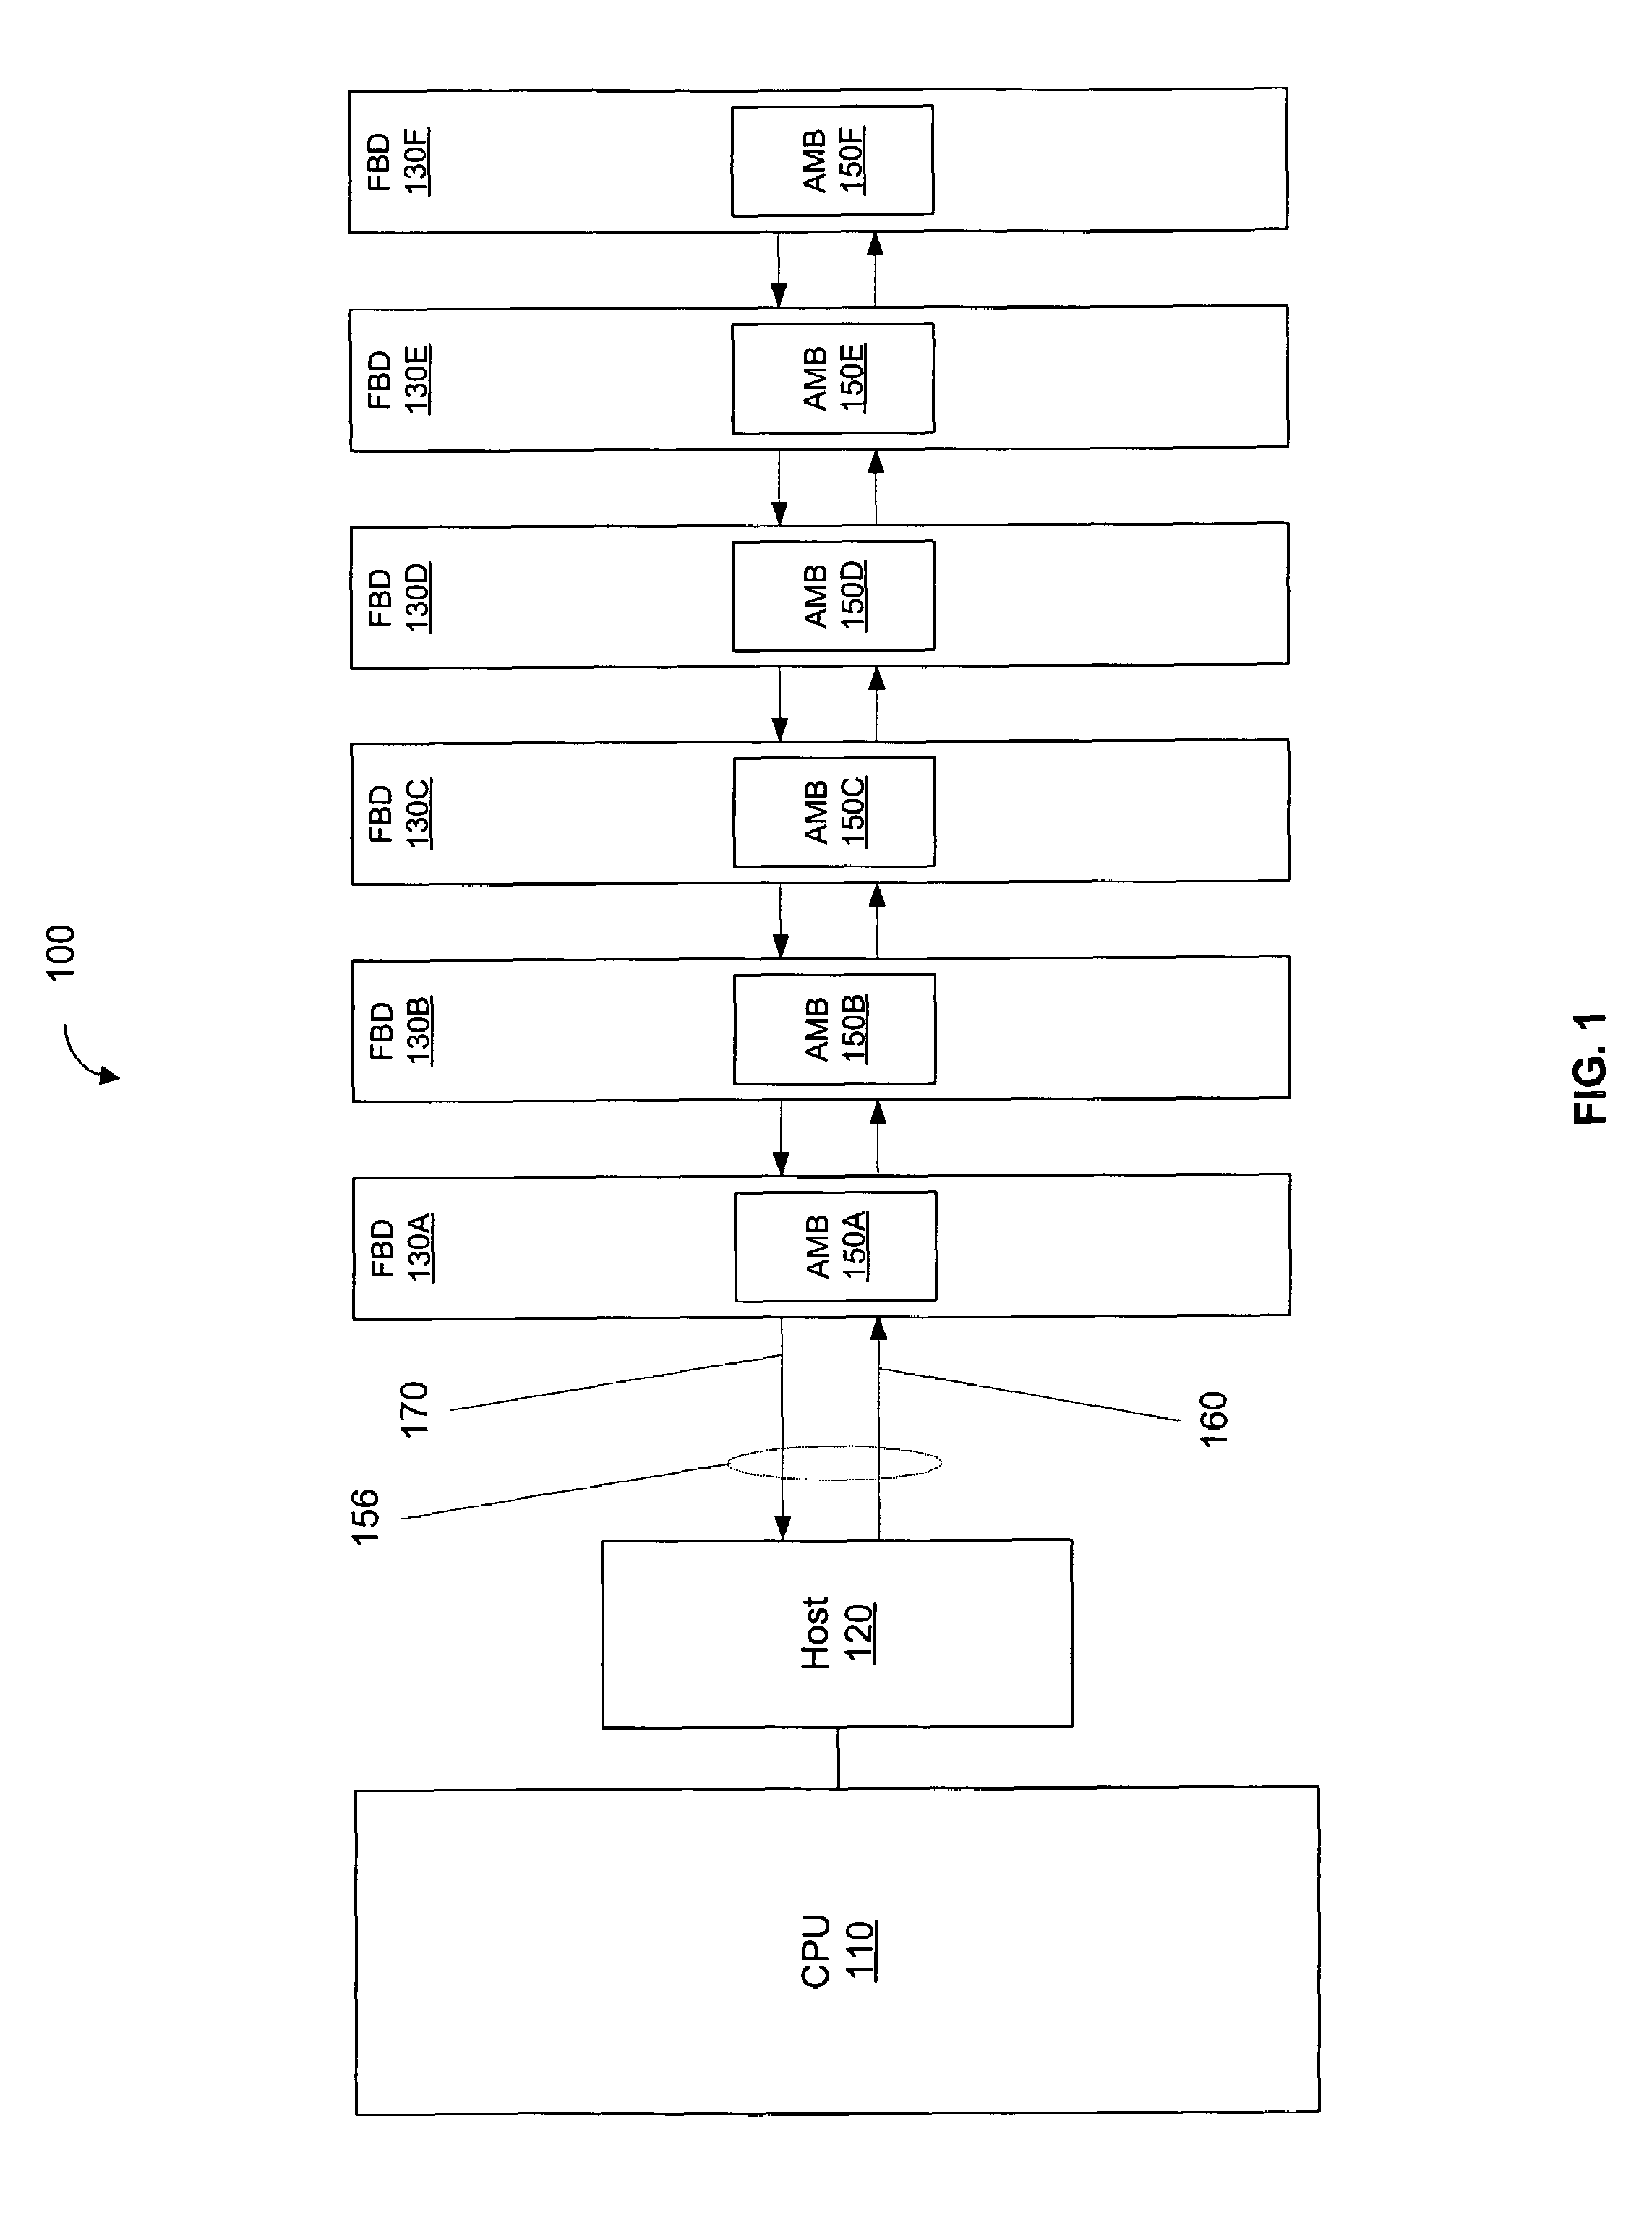 System memory board subsystem using DRAM with integrated high speed point to point links